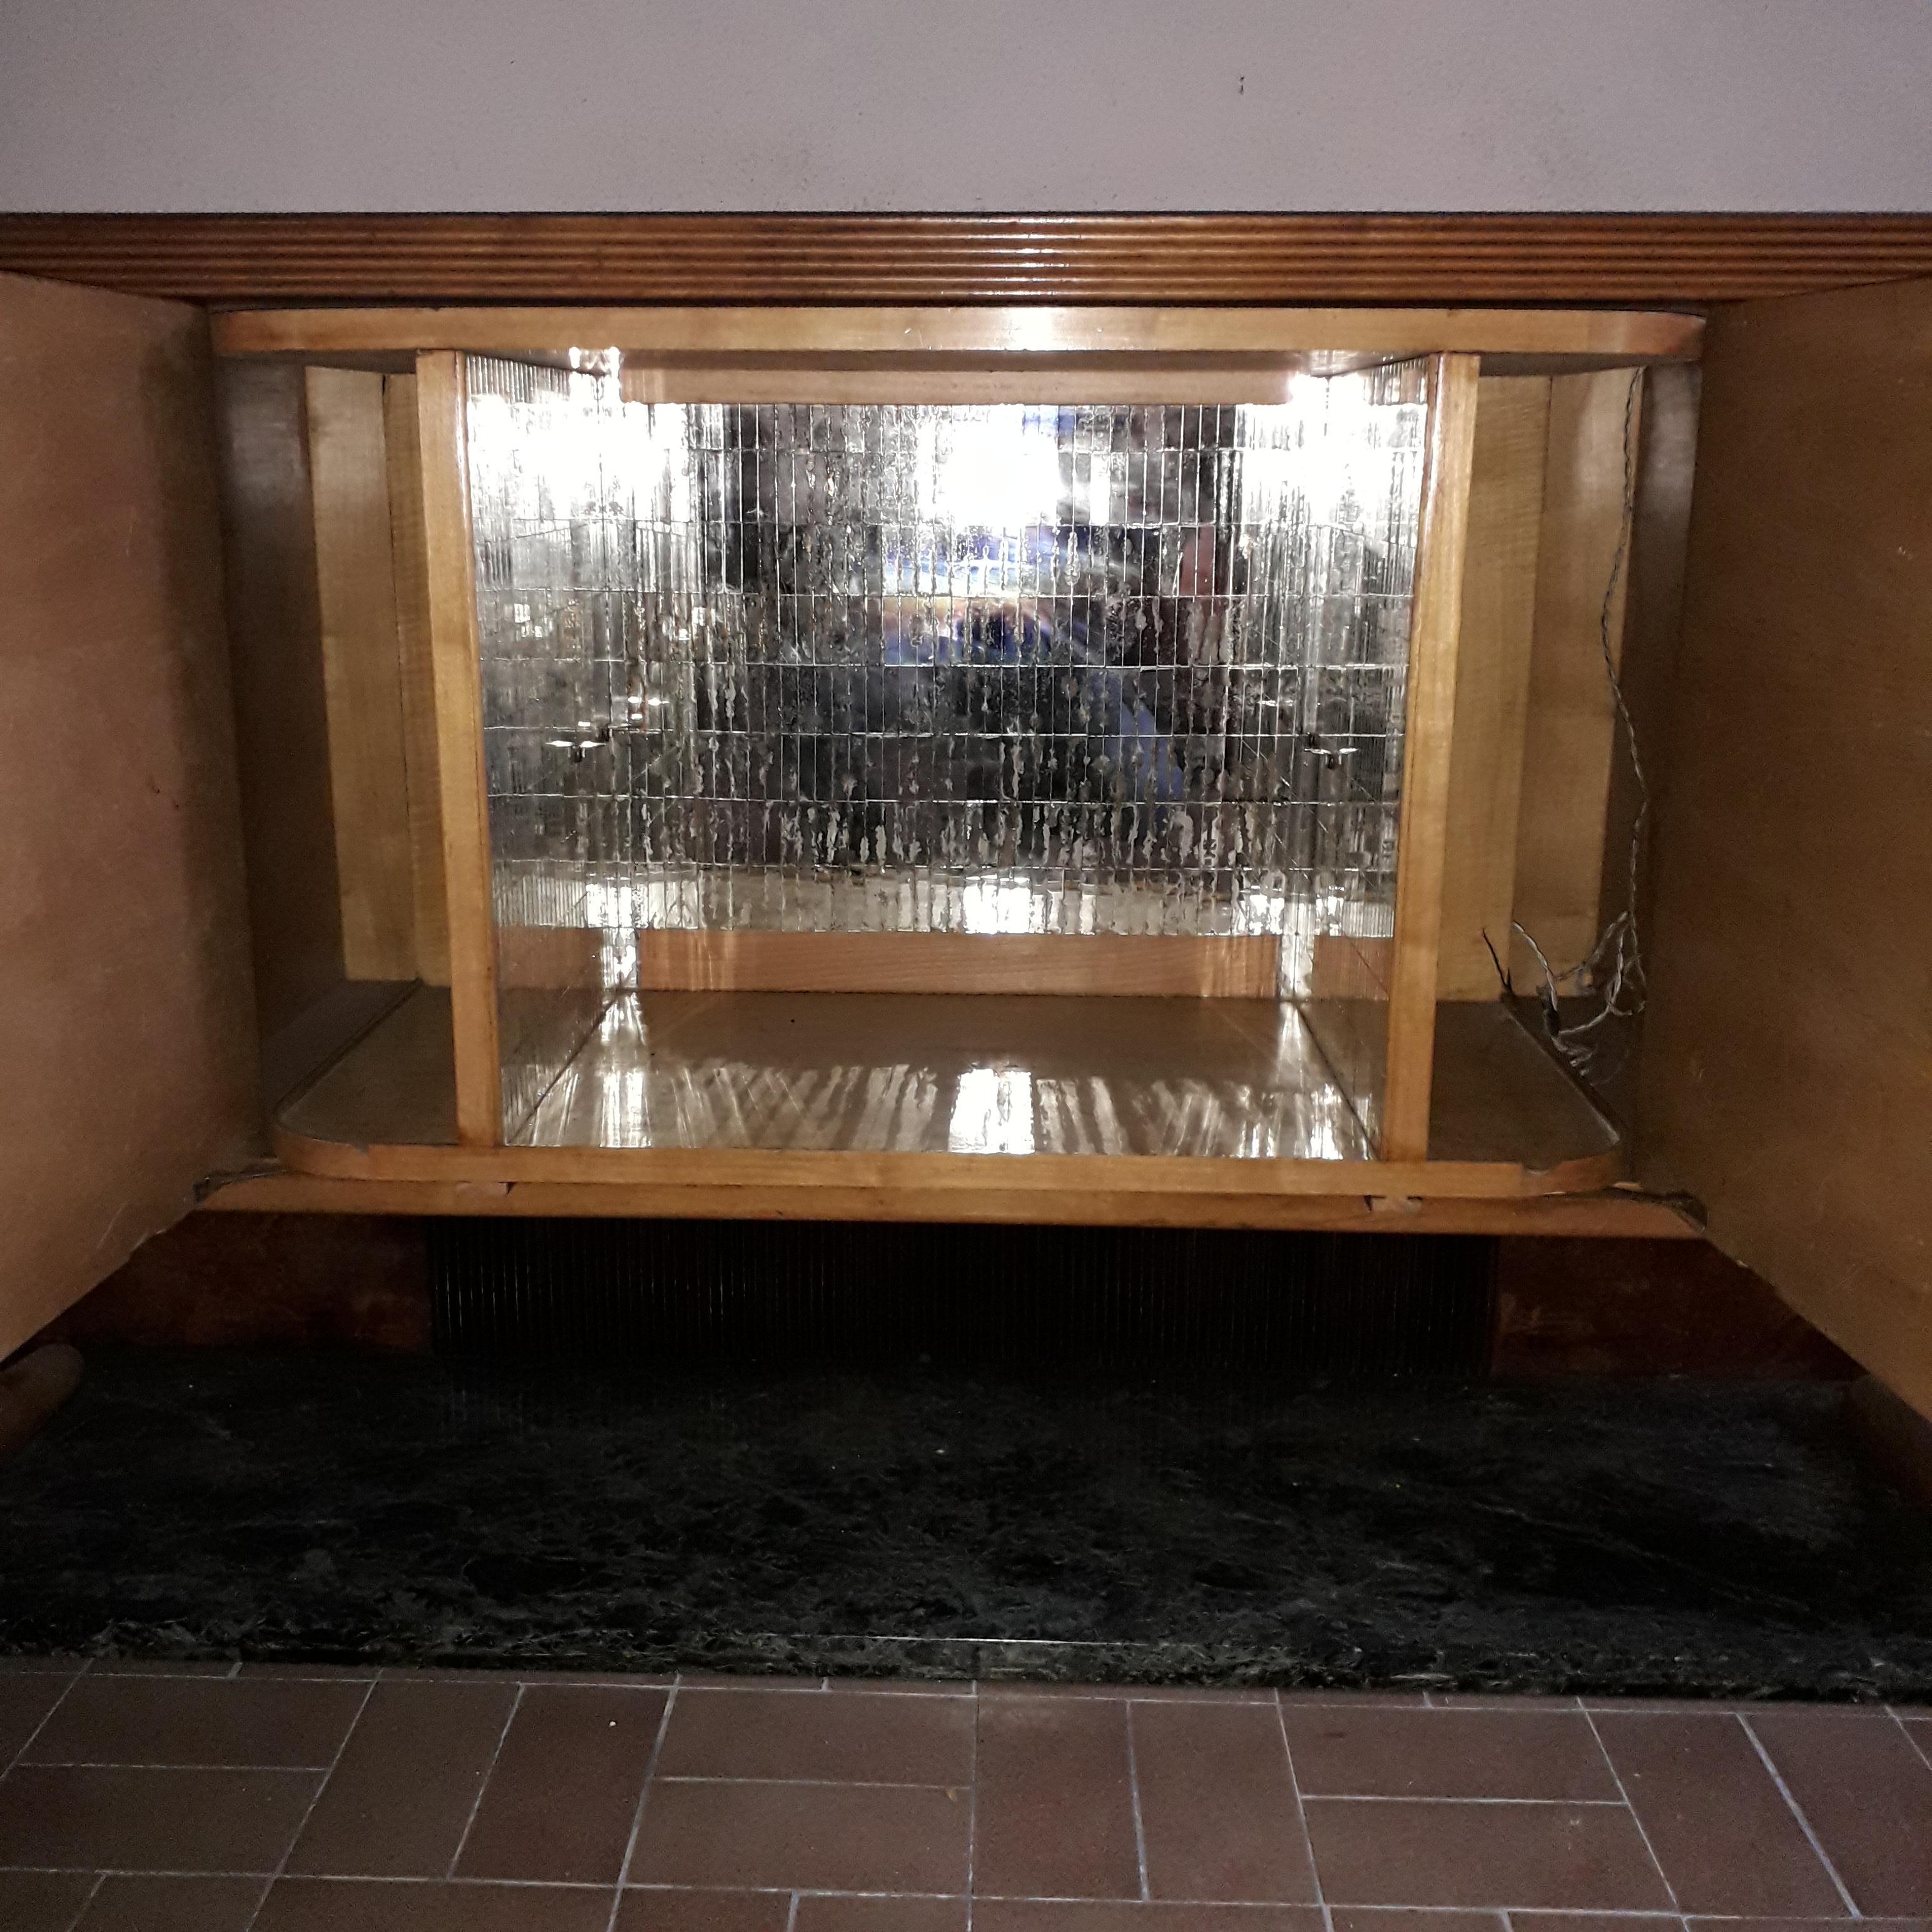 Art Deco bar credence by Vittorio Dassi, Milan.

The curved body, opens on eight drawers and discovers in its center a bar illuminating with sides covered with a mosaic mirror.
Connected by feet in massive Sycamore, the whole rests on a green marble